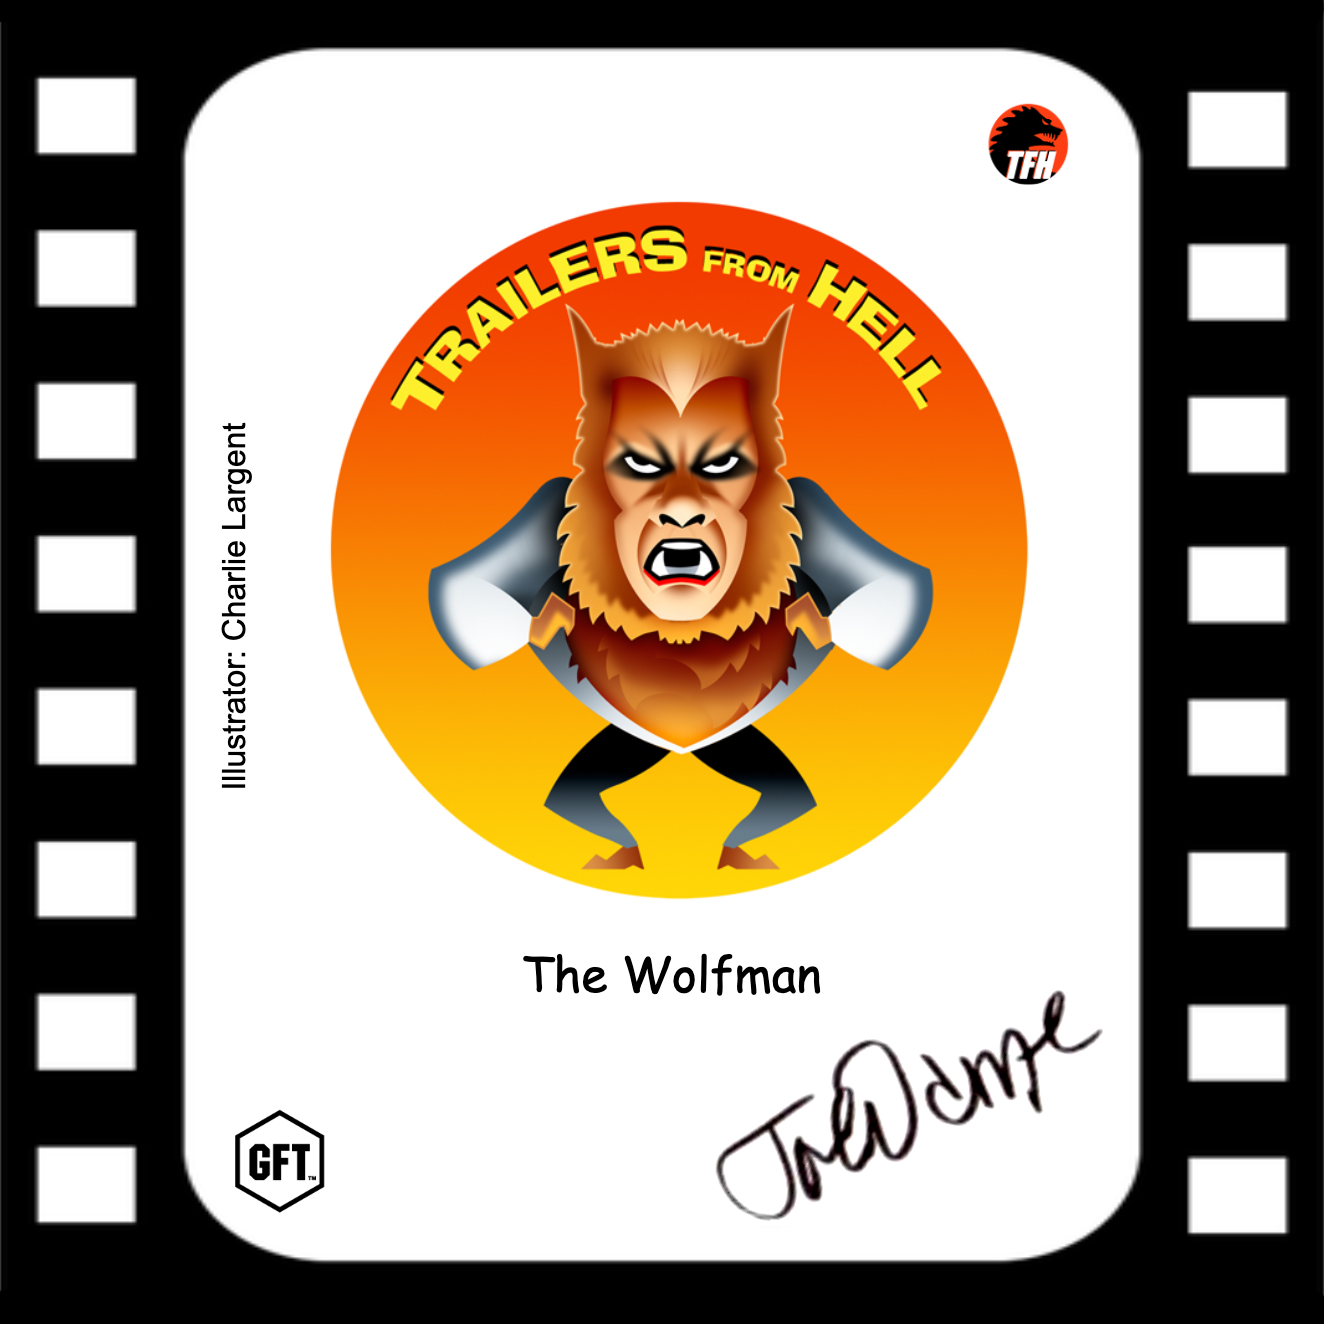 Trailers From Hell: The Wolfman